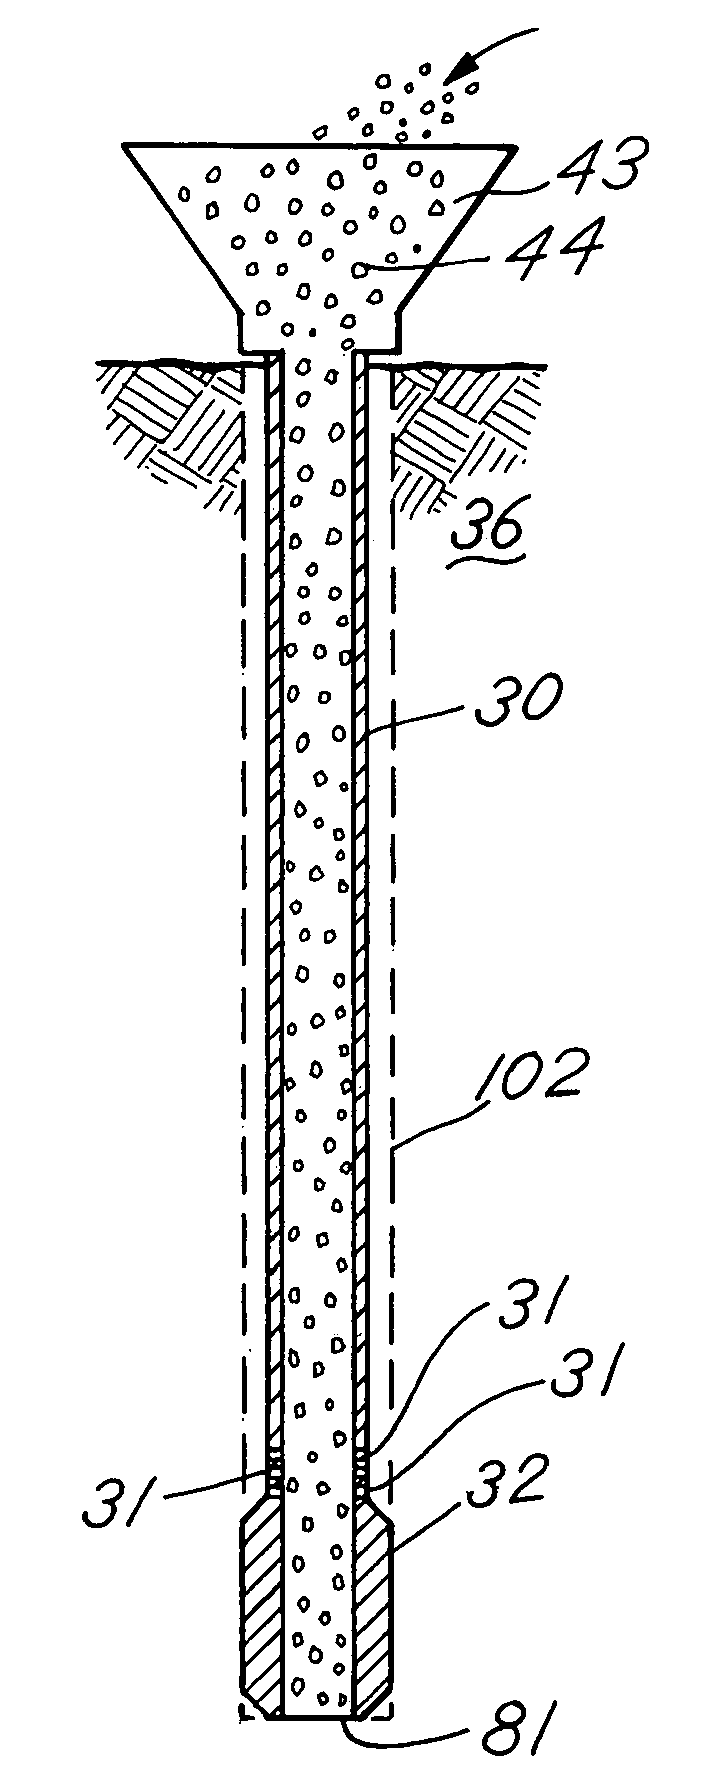 Apparatus and method for building support piers from one or successive lifts formed in a soil matrix